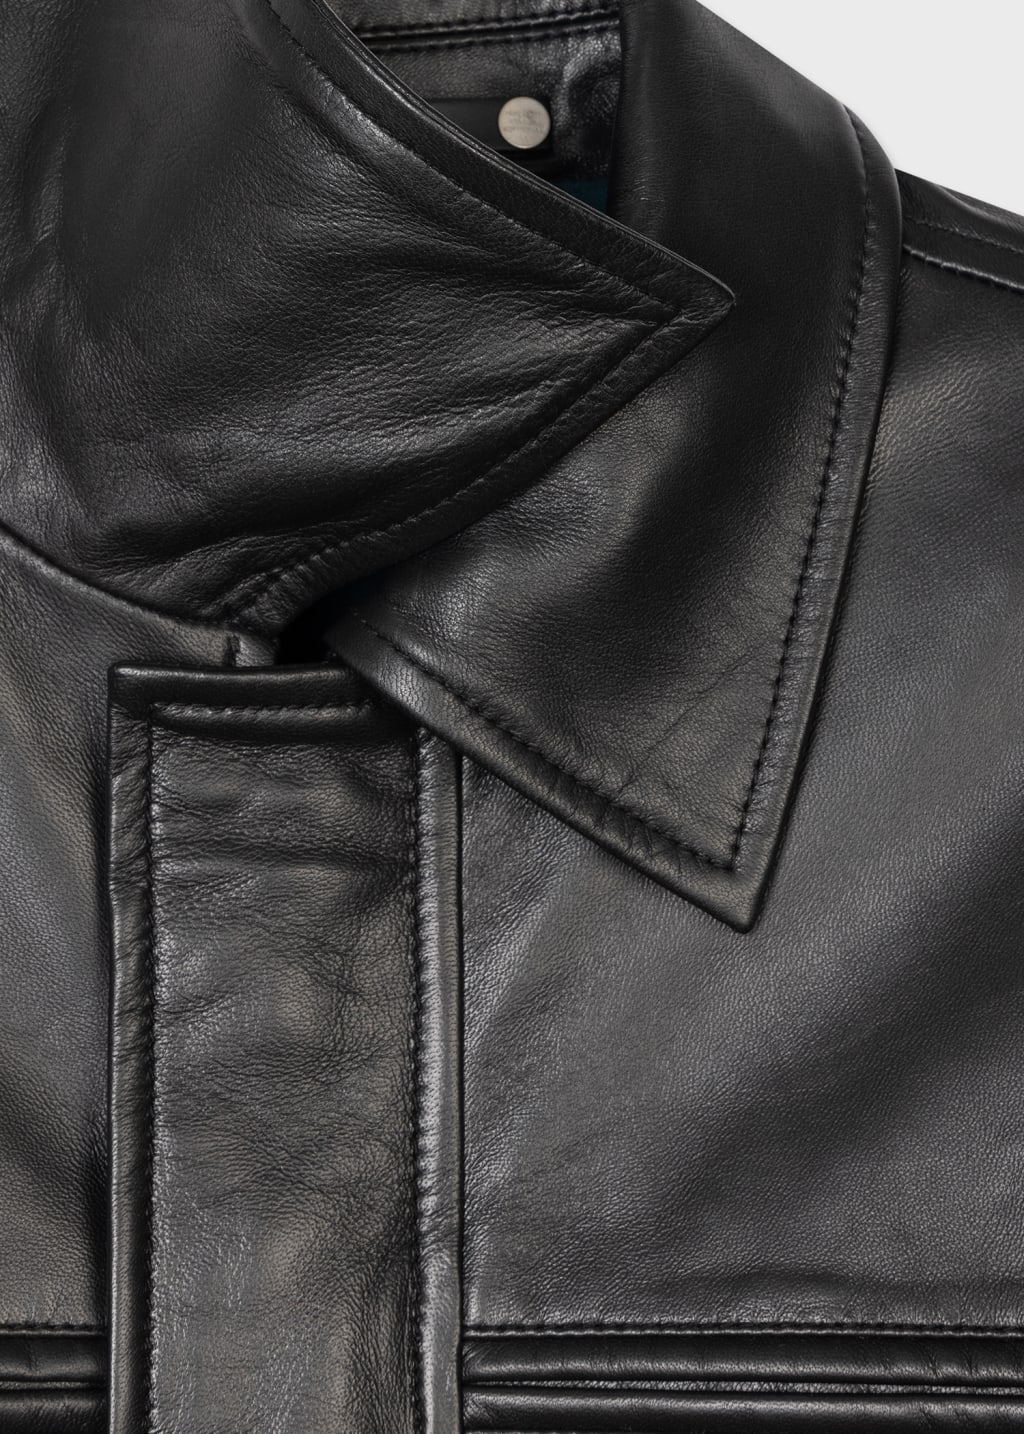 Detail View - Black Leather Jacket Paul Smith